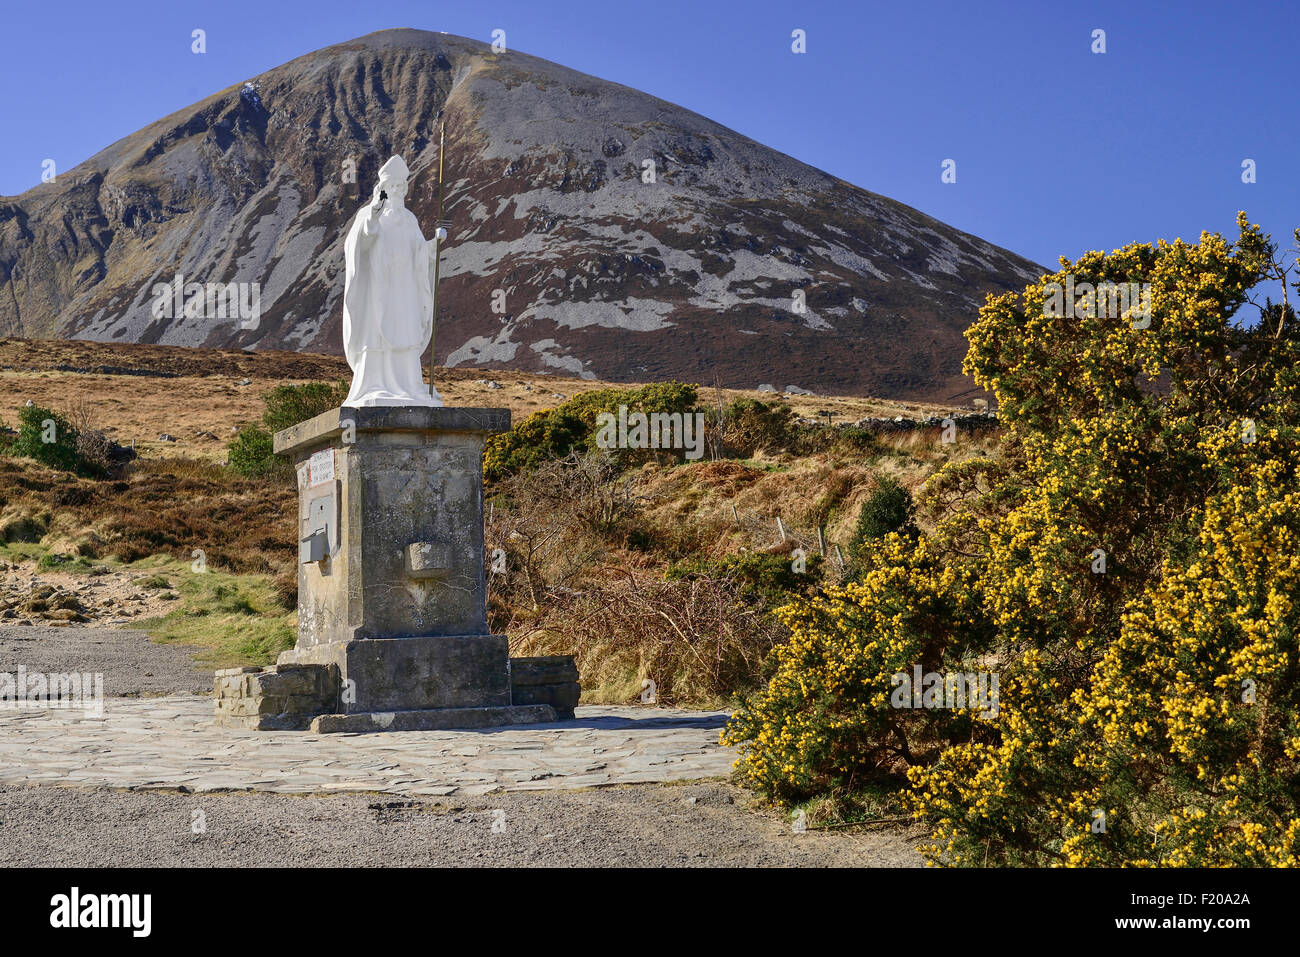 Ireland, County Mayo, Murrisk, The holy pilgrimage mountain of Croagh Patrick with a statue of Saint Patrick in the foreground. Stock Photo